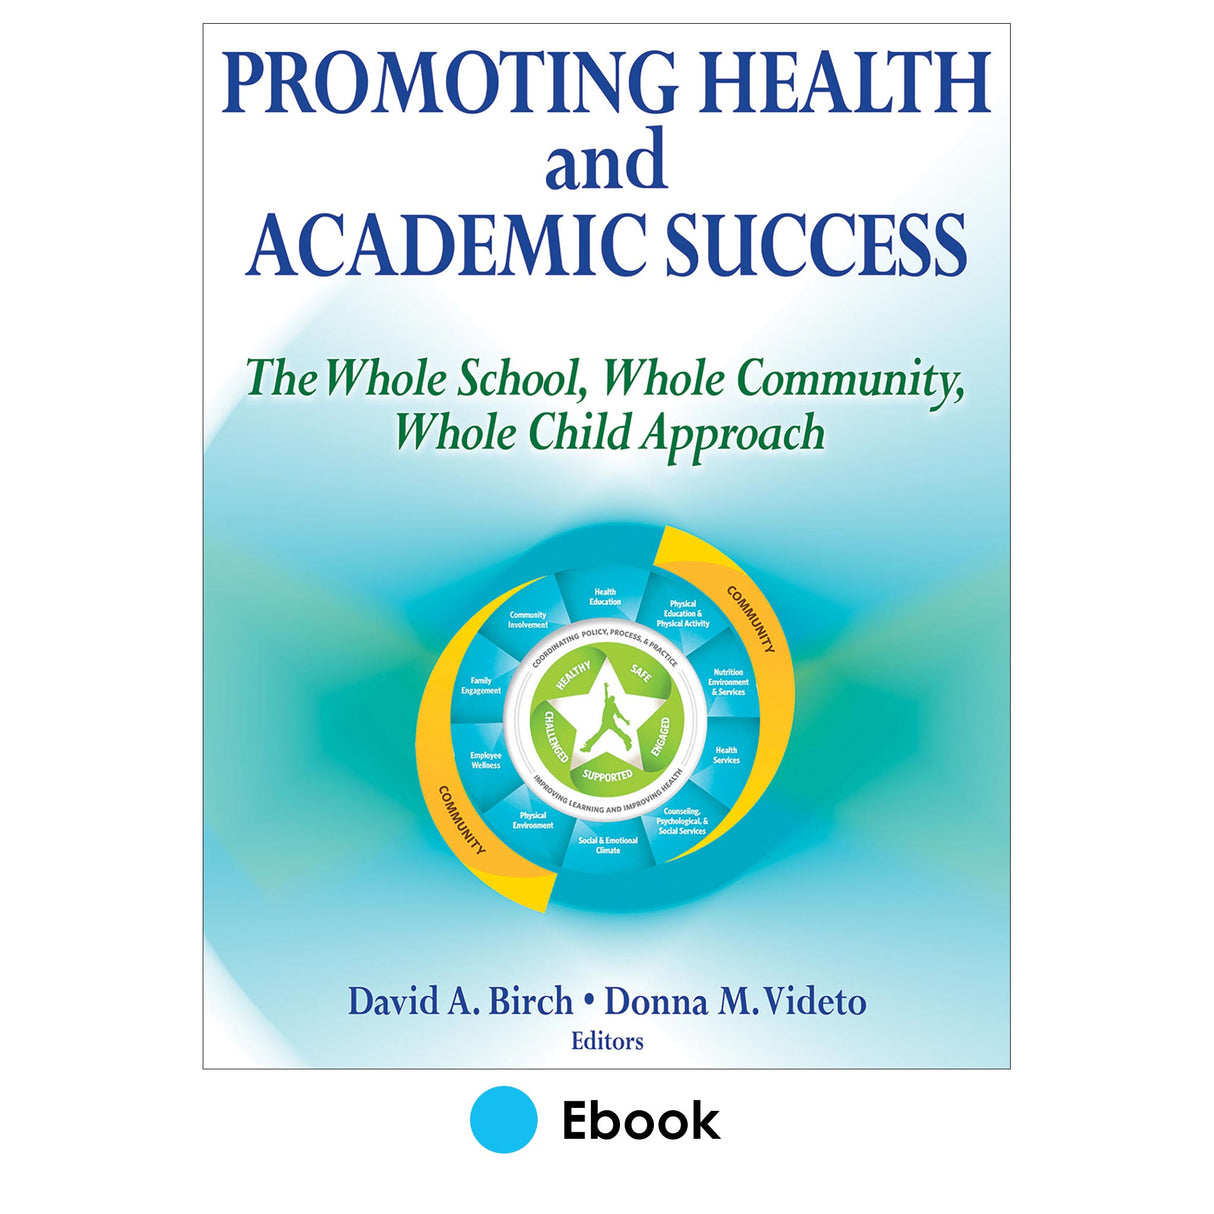 Promoting Health and Academic Success PDF